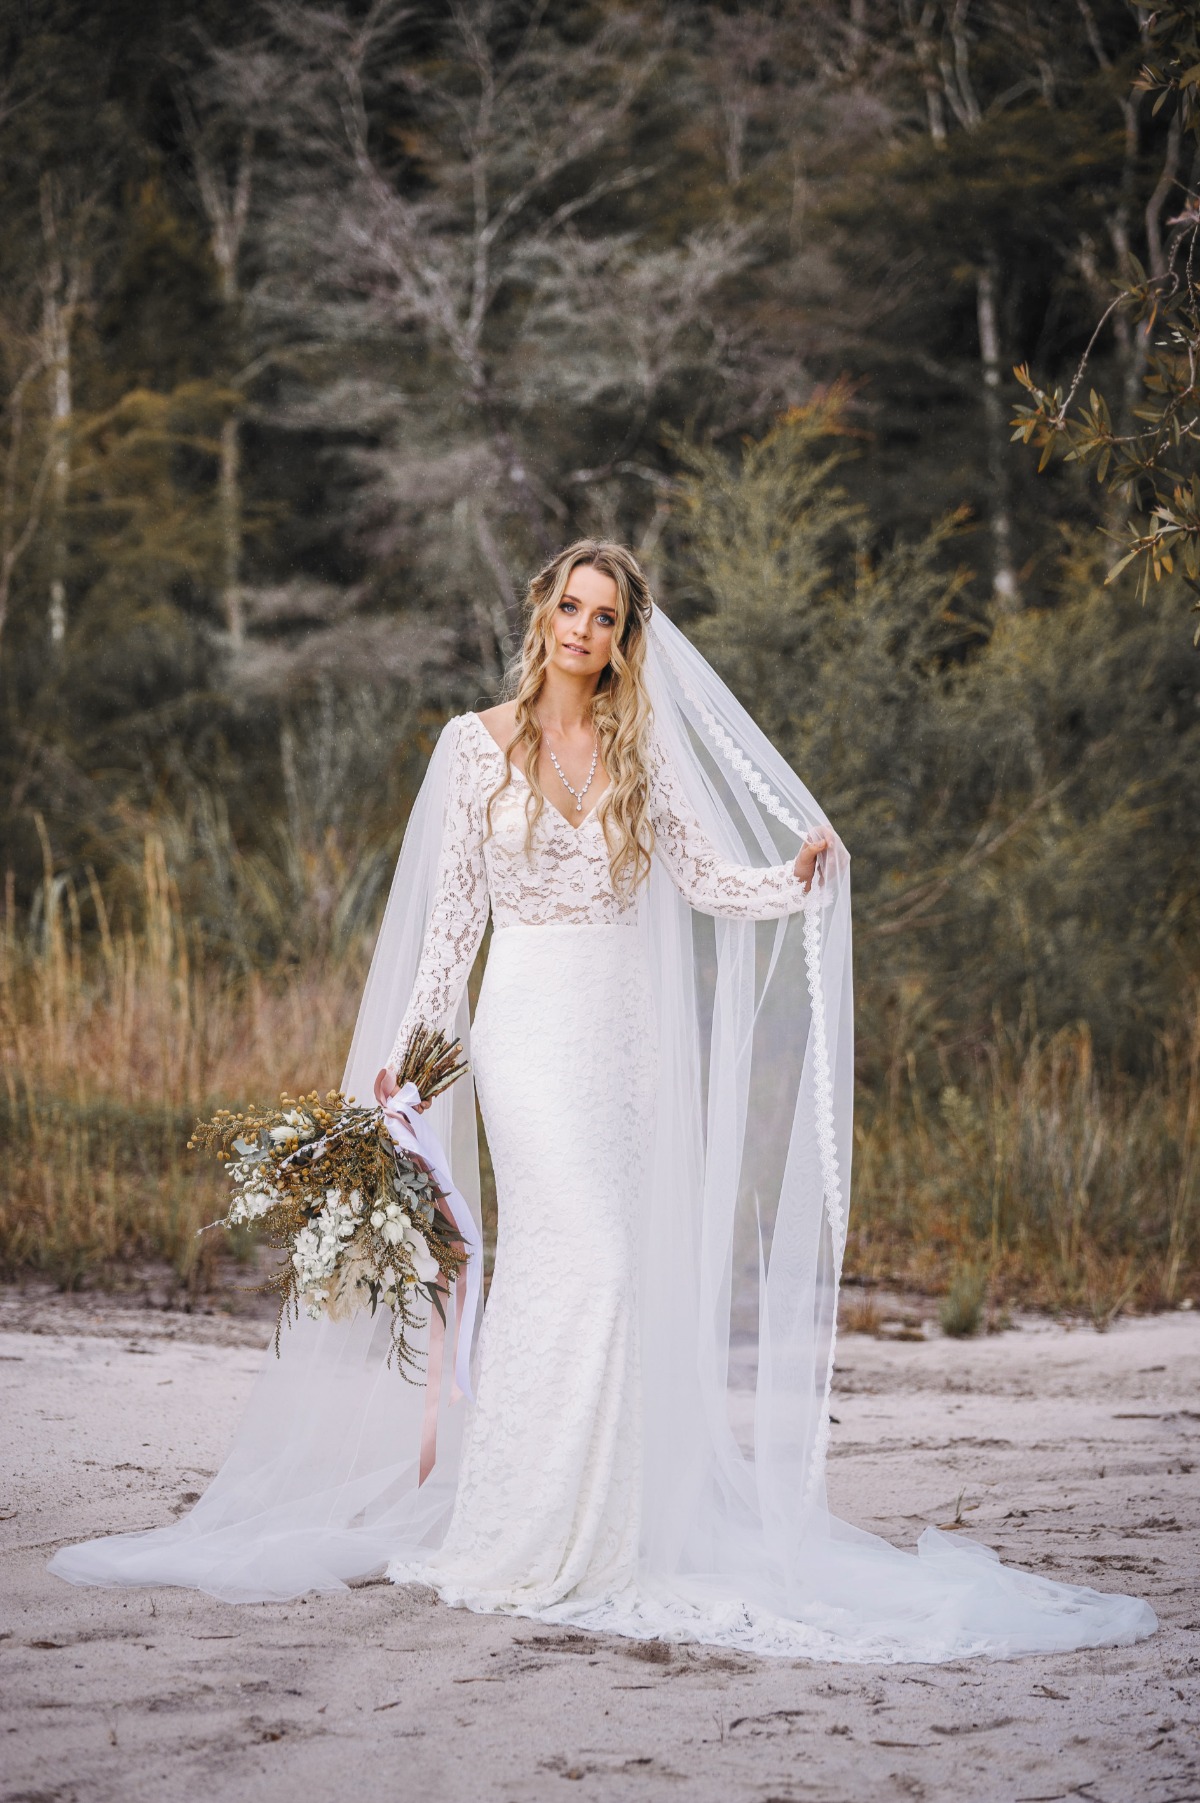 Alysia gown from Goddess by Nature